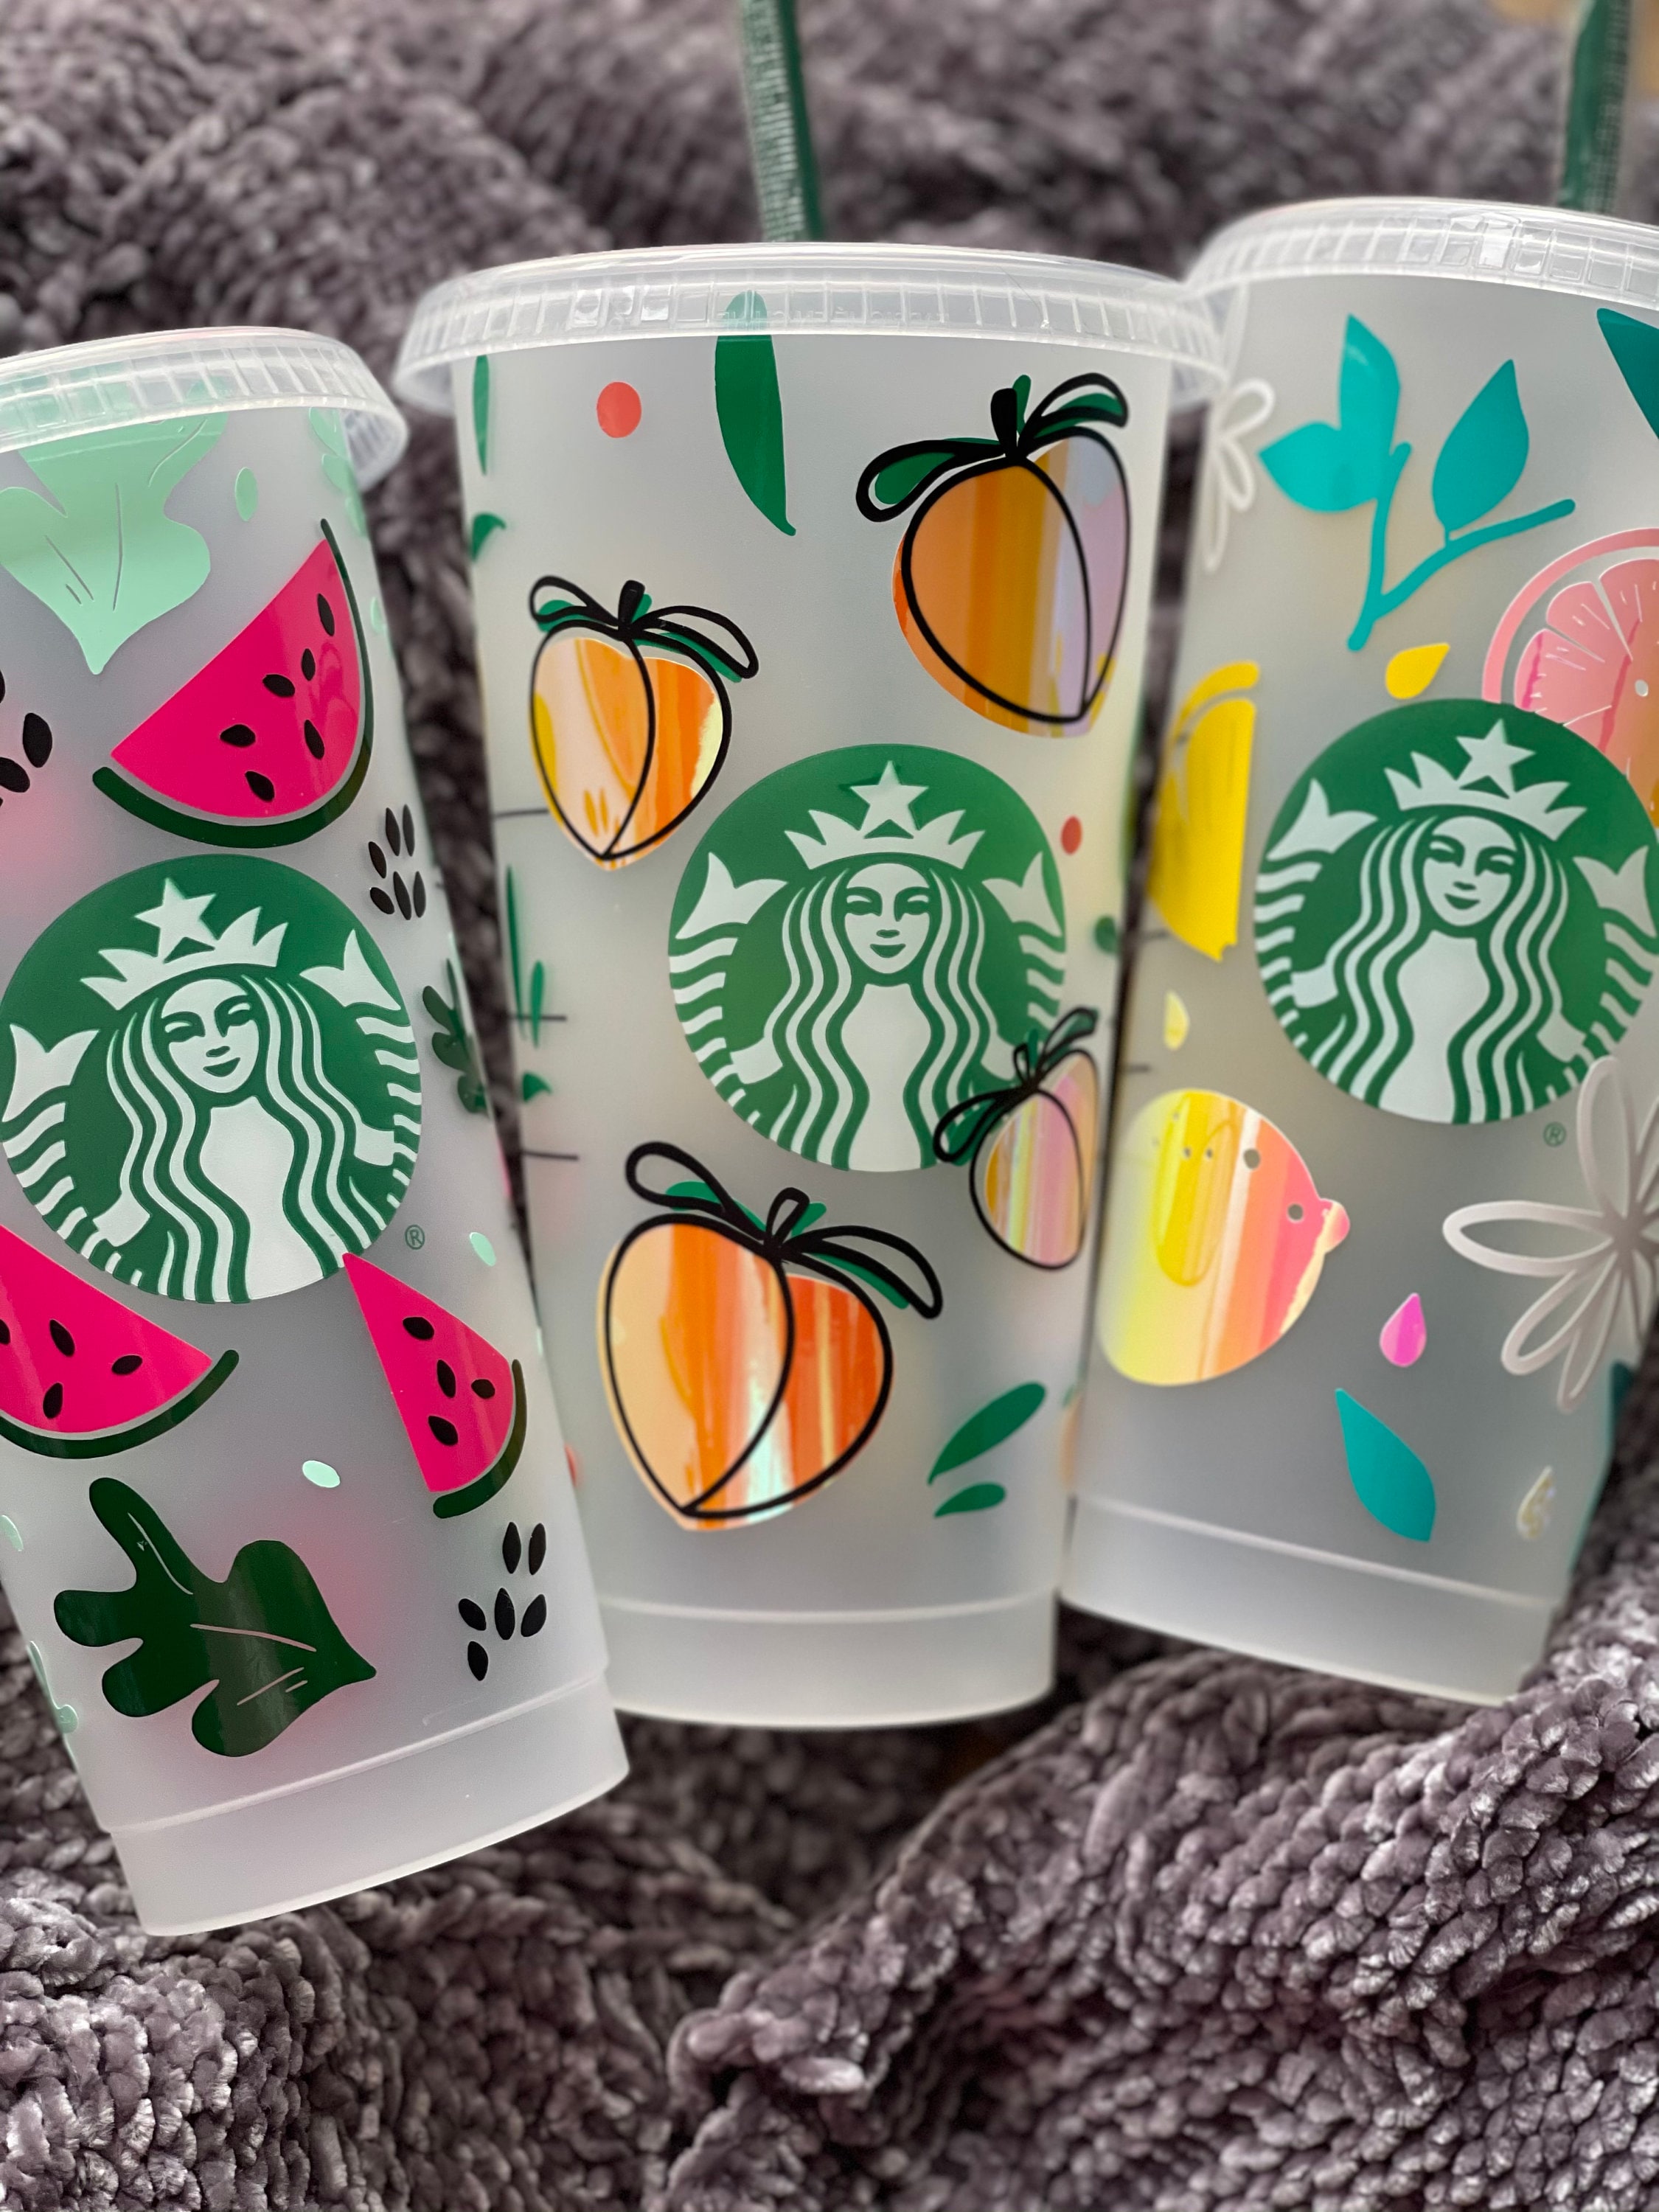 Starbucks Watermelon Cup: Is There a Starbucks Watermelon Mug Release Date?  Answered